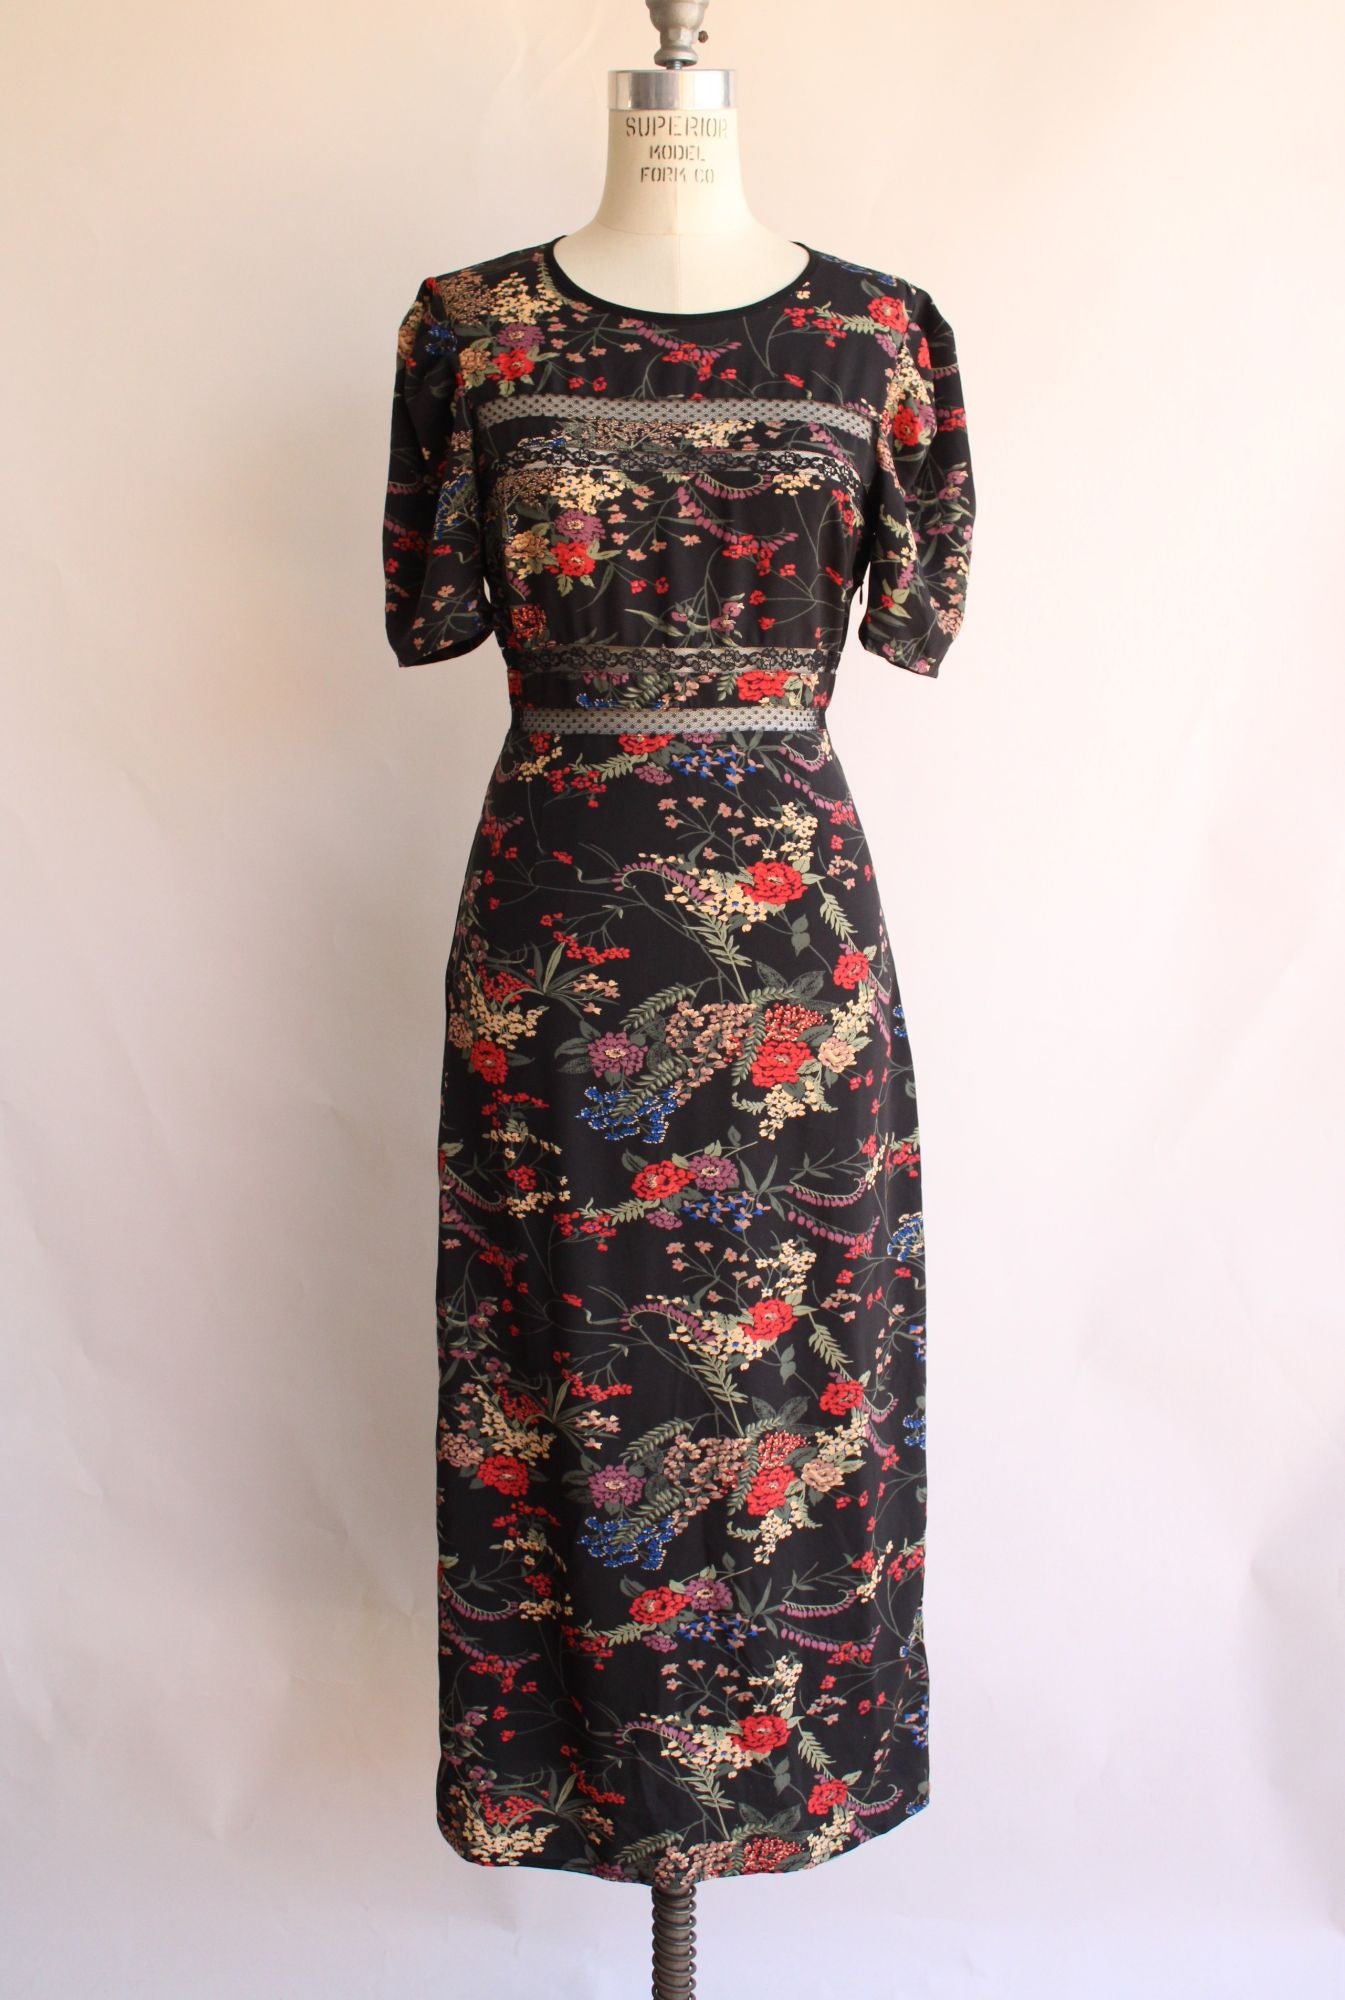 Urban Outfitters Womens Dress, Size S-P, Keyhole Back, Lace Trim, Floral Print